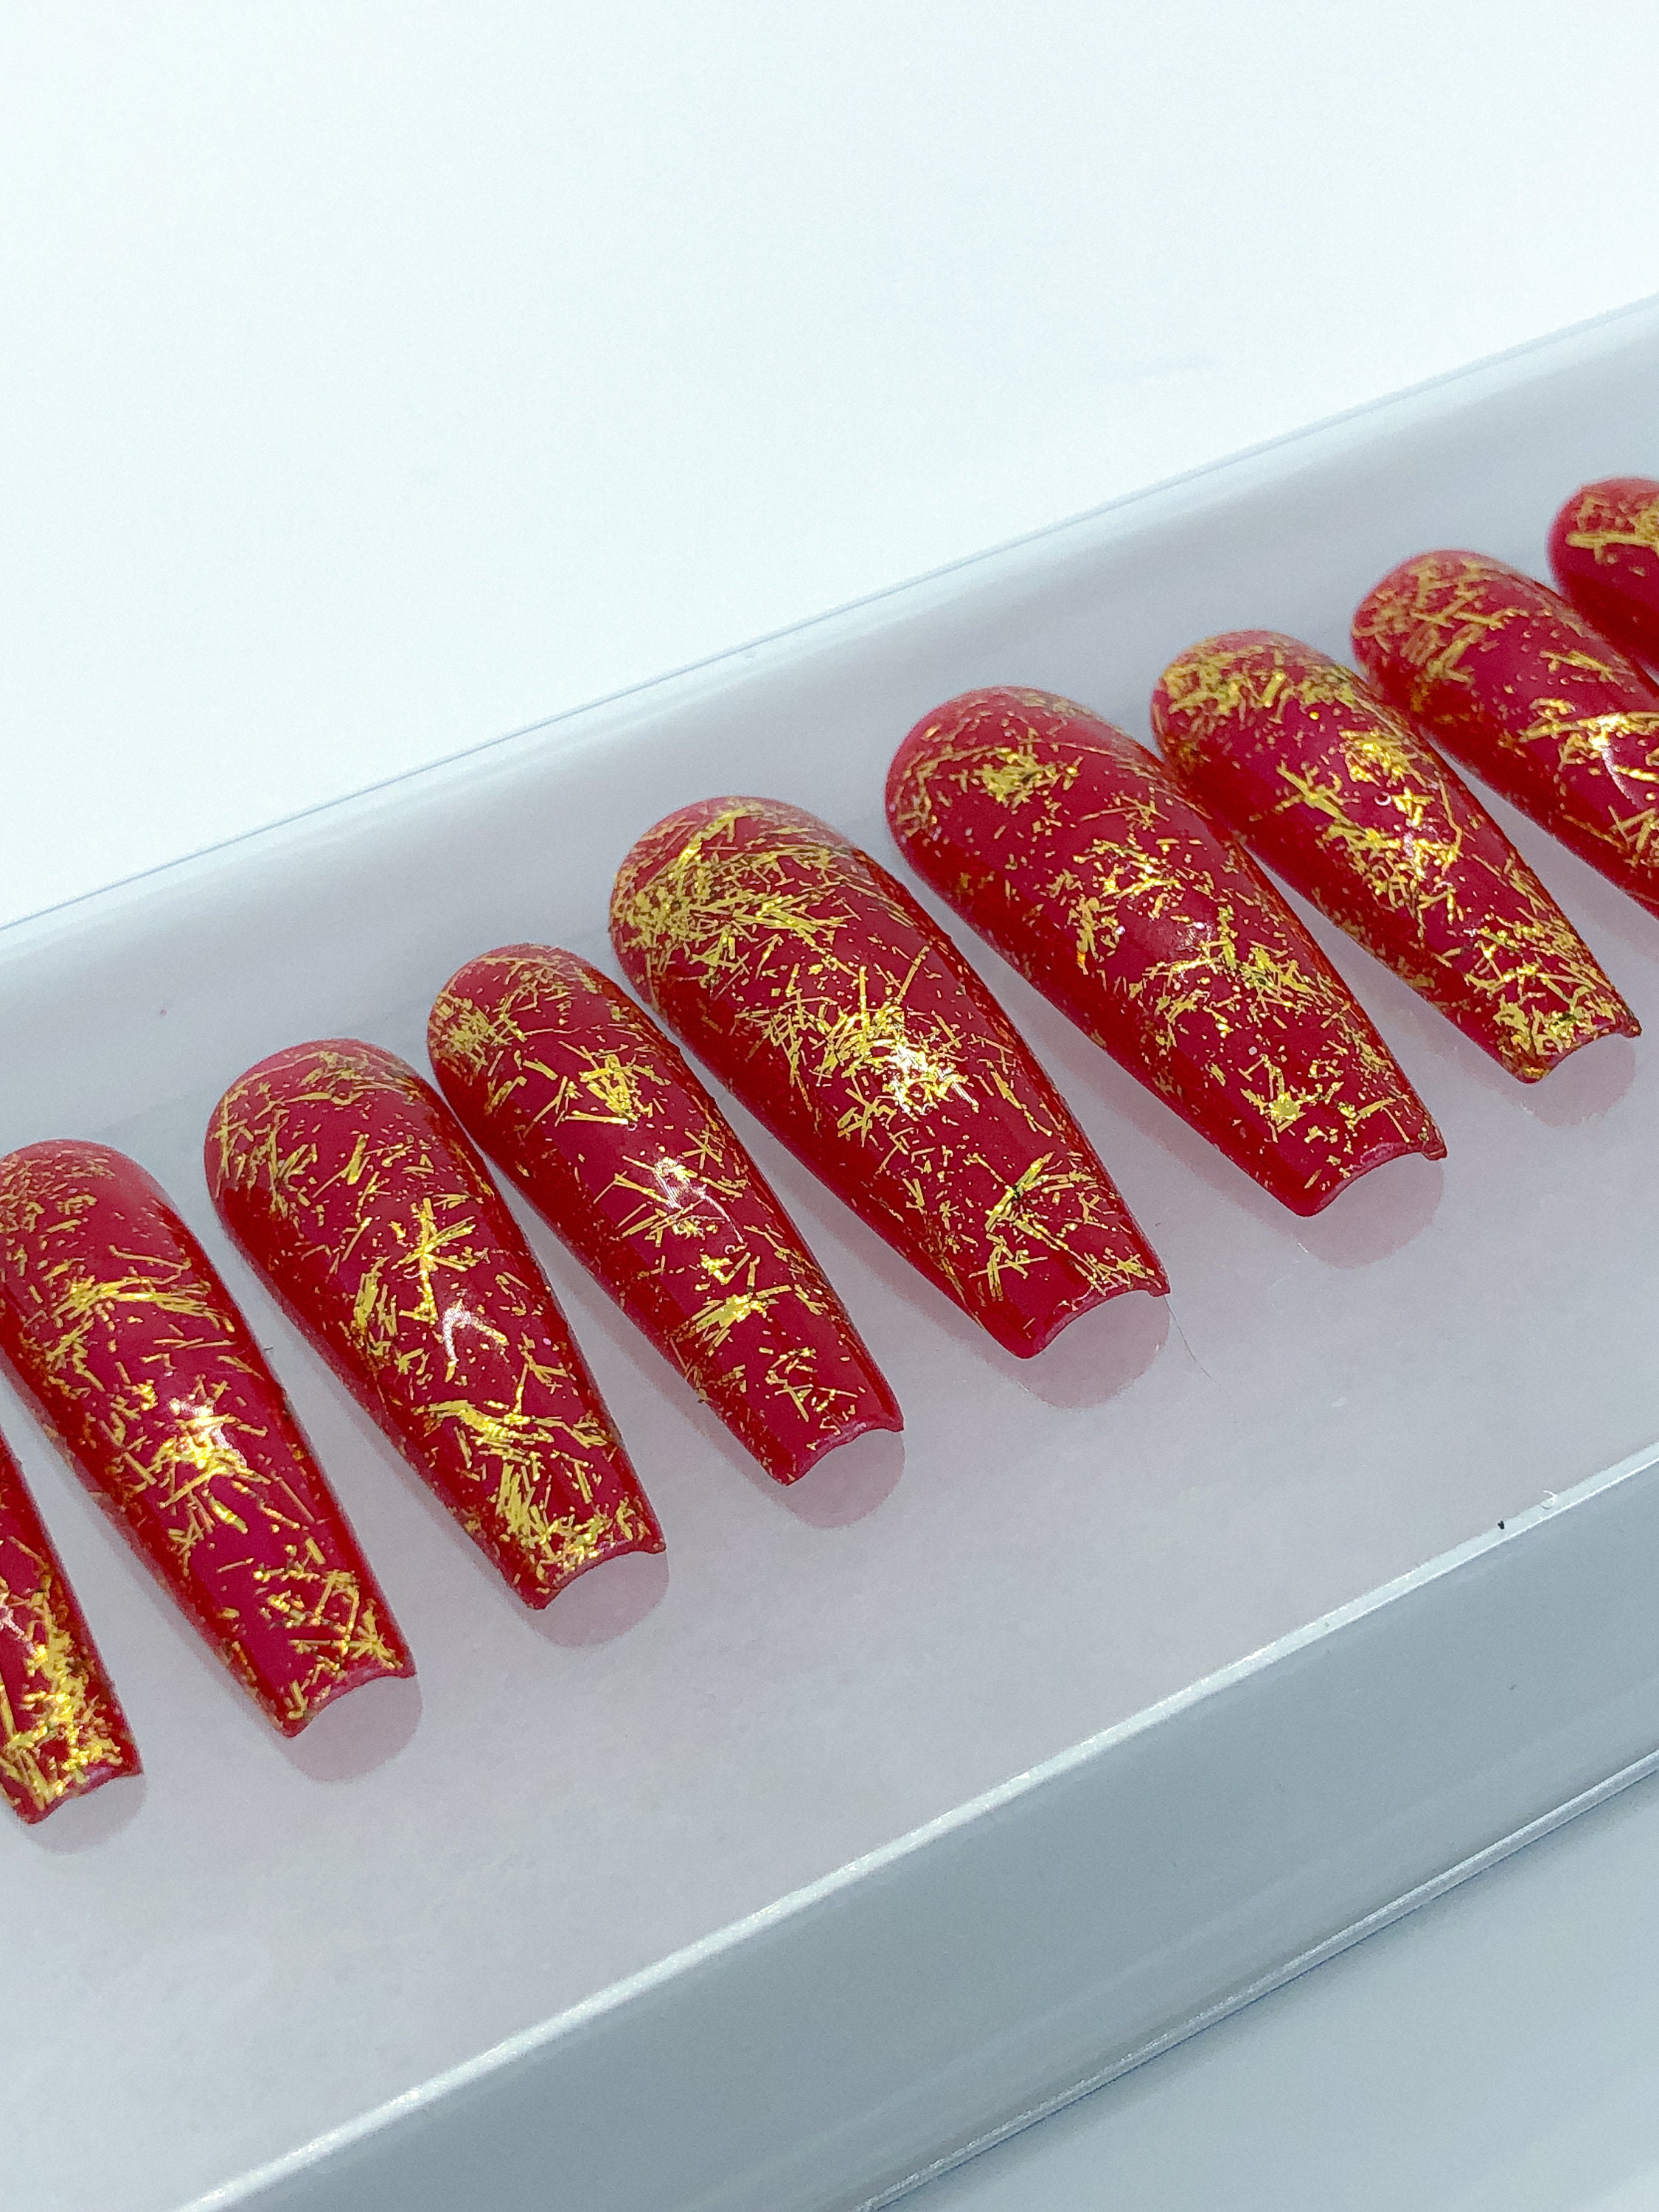 The 30 Best Red and Gold Nail Ideas For the Holidays